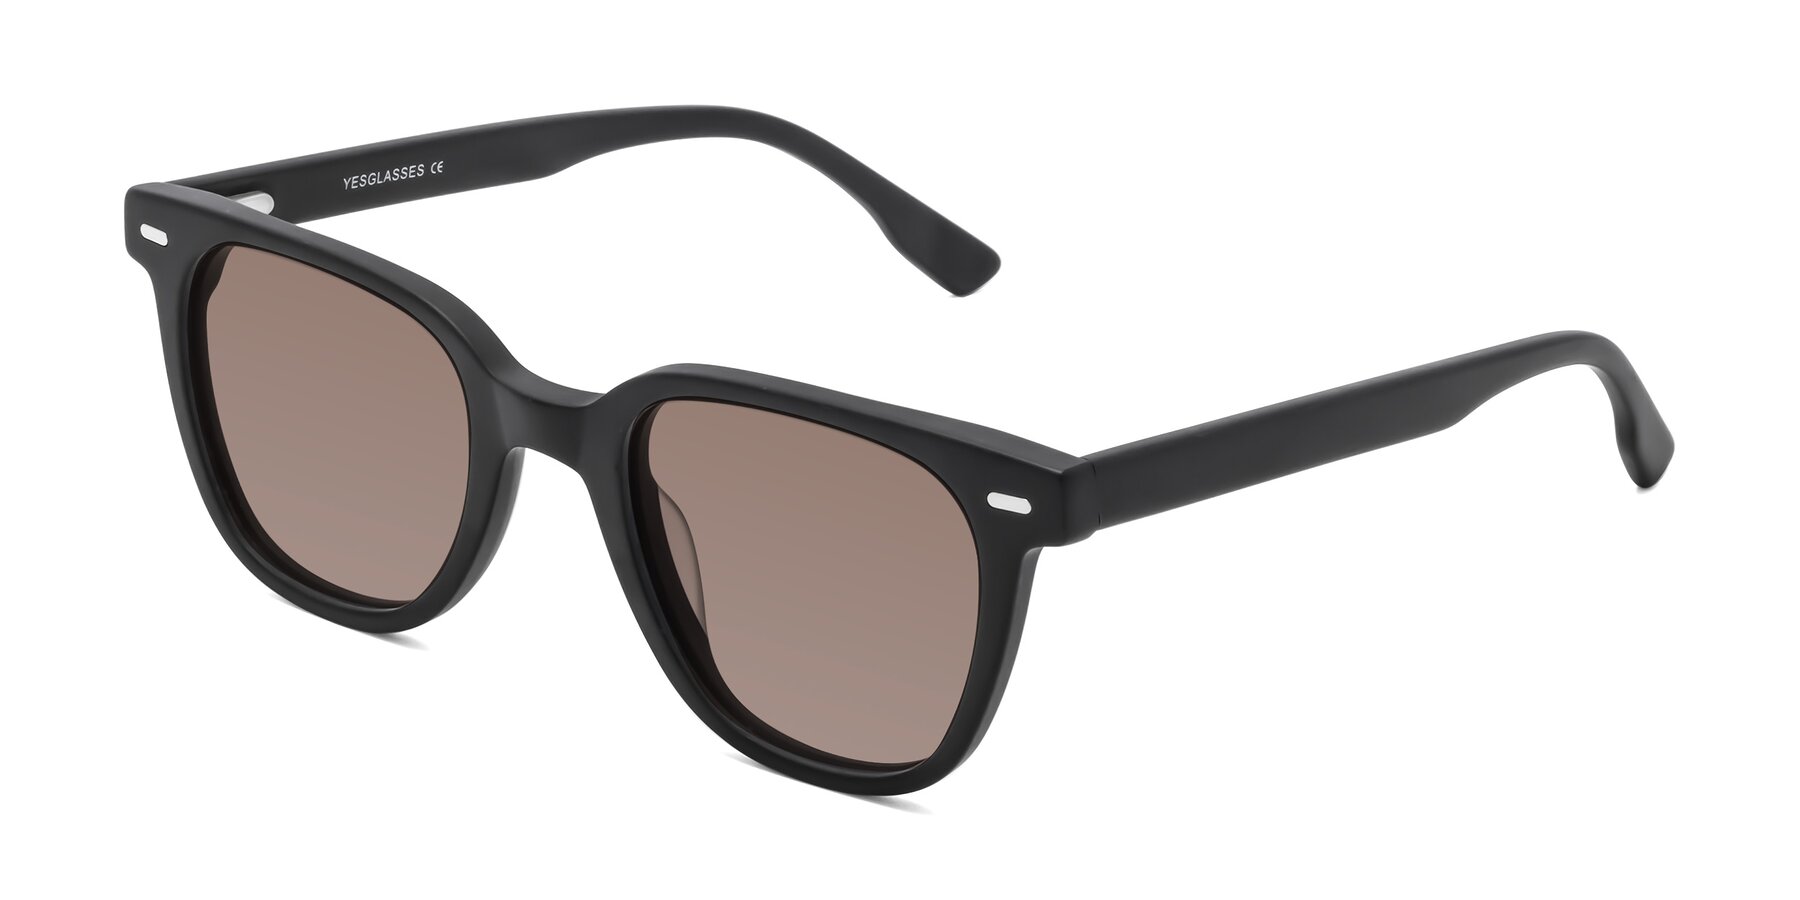 Angle of Beacon in Matte Black with Medium Brown Tinted Lenses